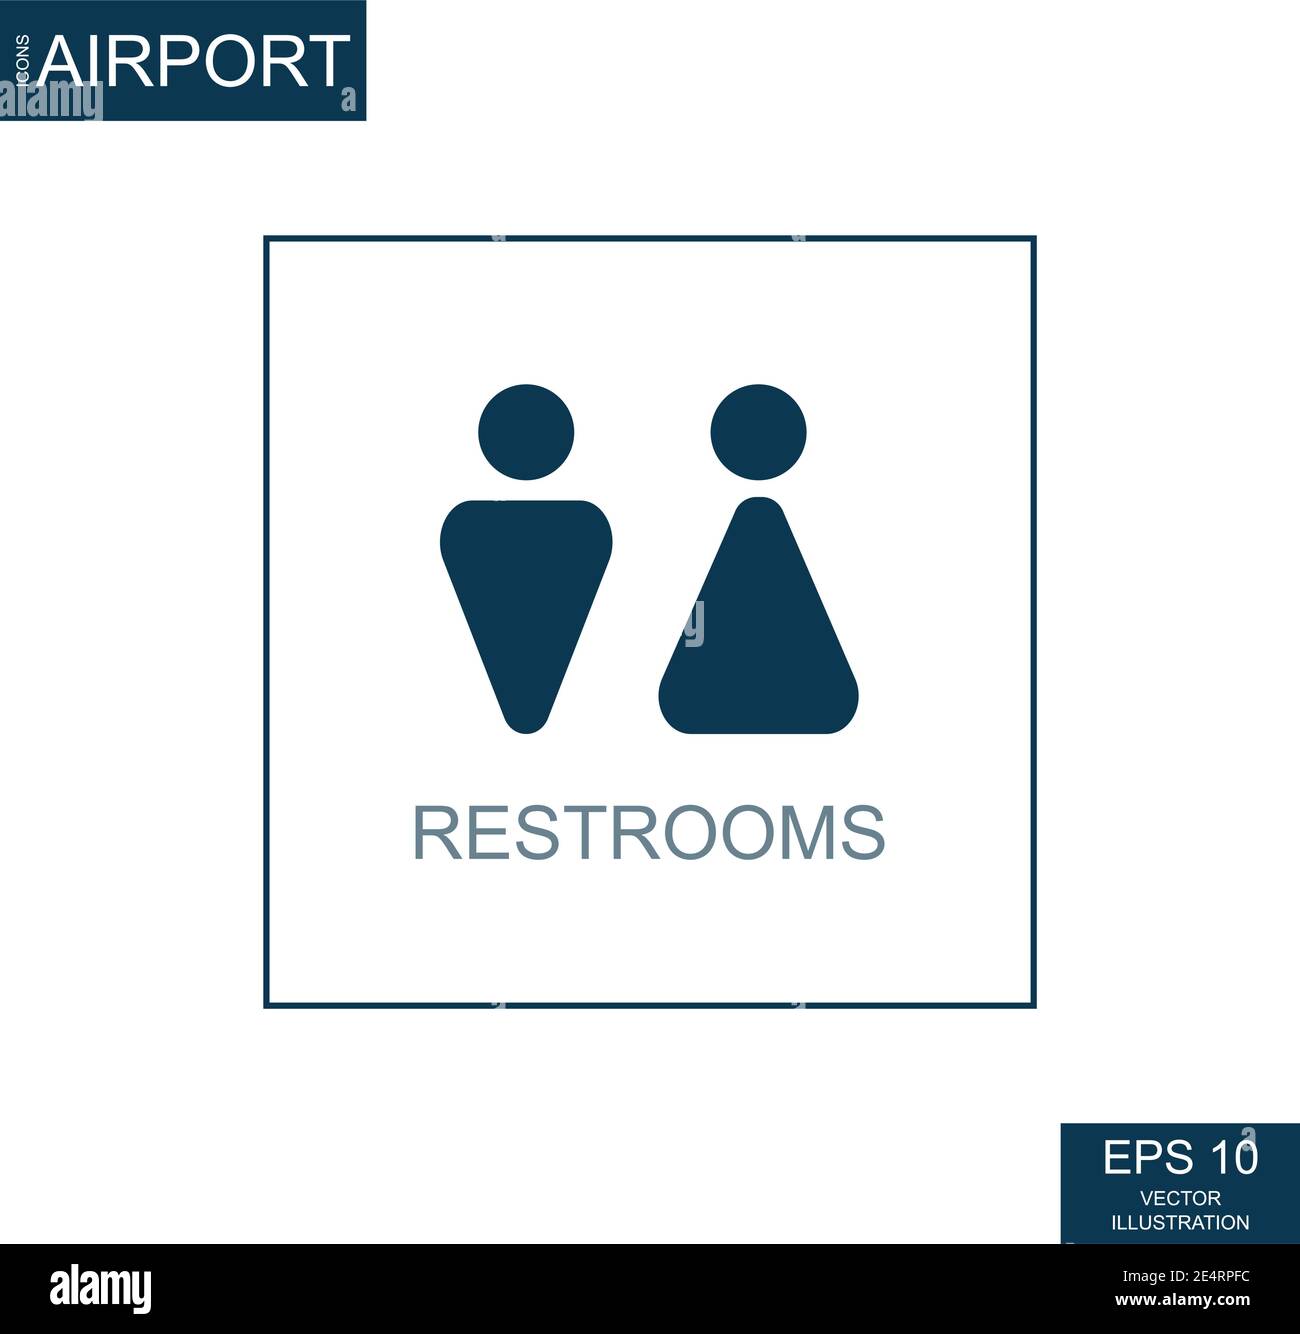 Abstract icon toilets on airport theme - Vector illustration Stock Vector